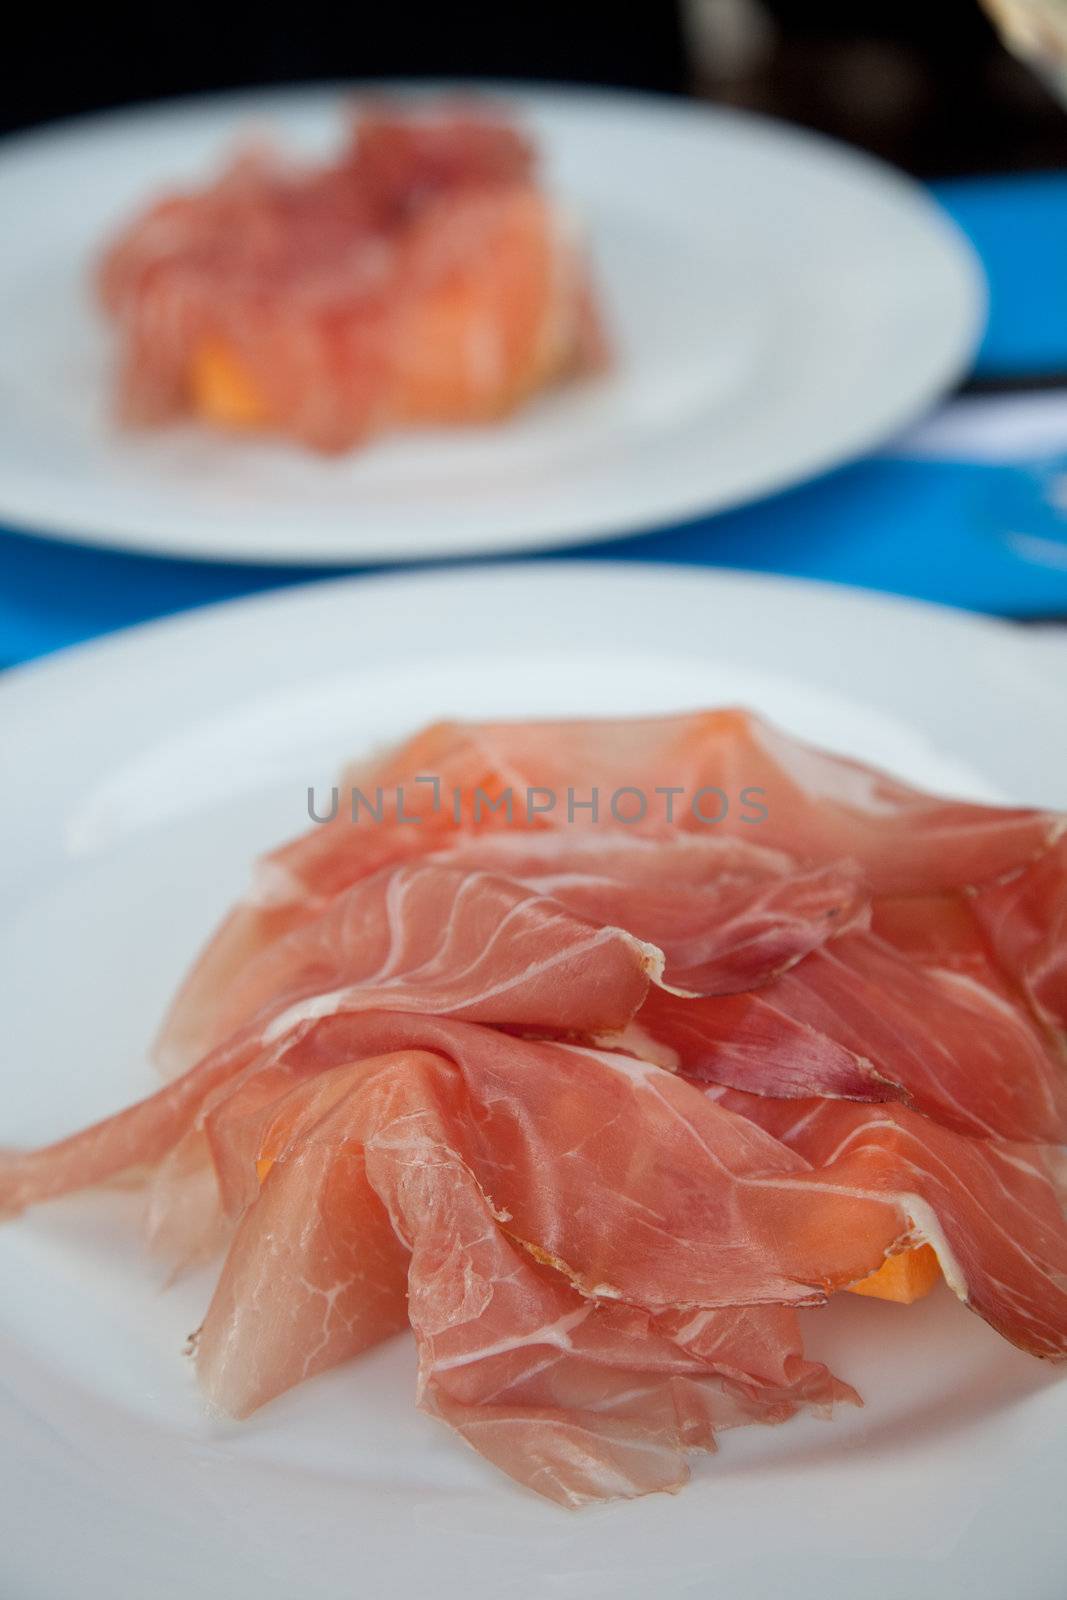 Fresh appetizer with prosciutto and melon on a plate